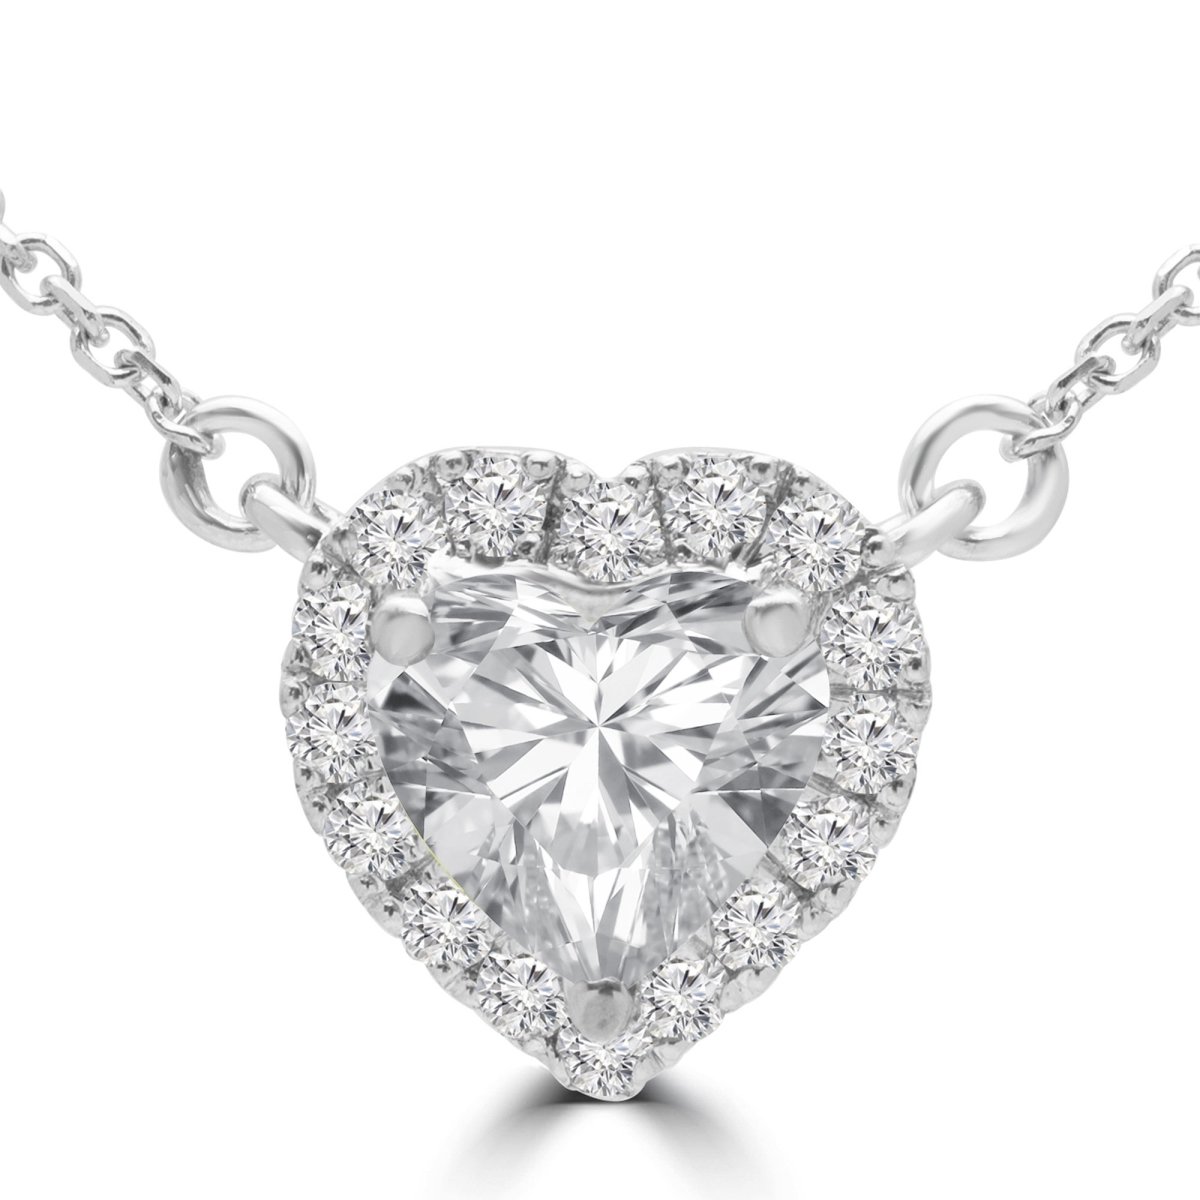 Picture of Majesty Diamonds MD240211 1.8 CTW Heart Diamond Halo Heart Necklace in 14K White Gold